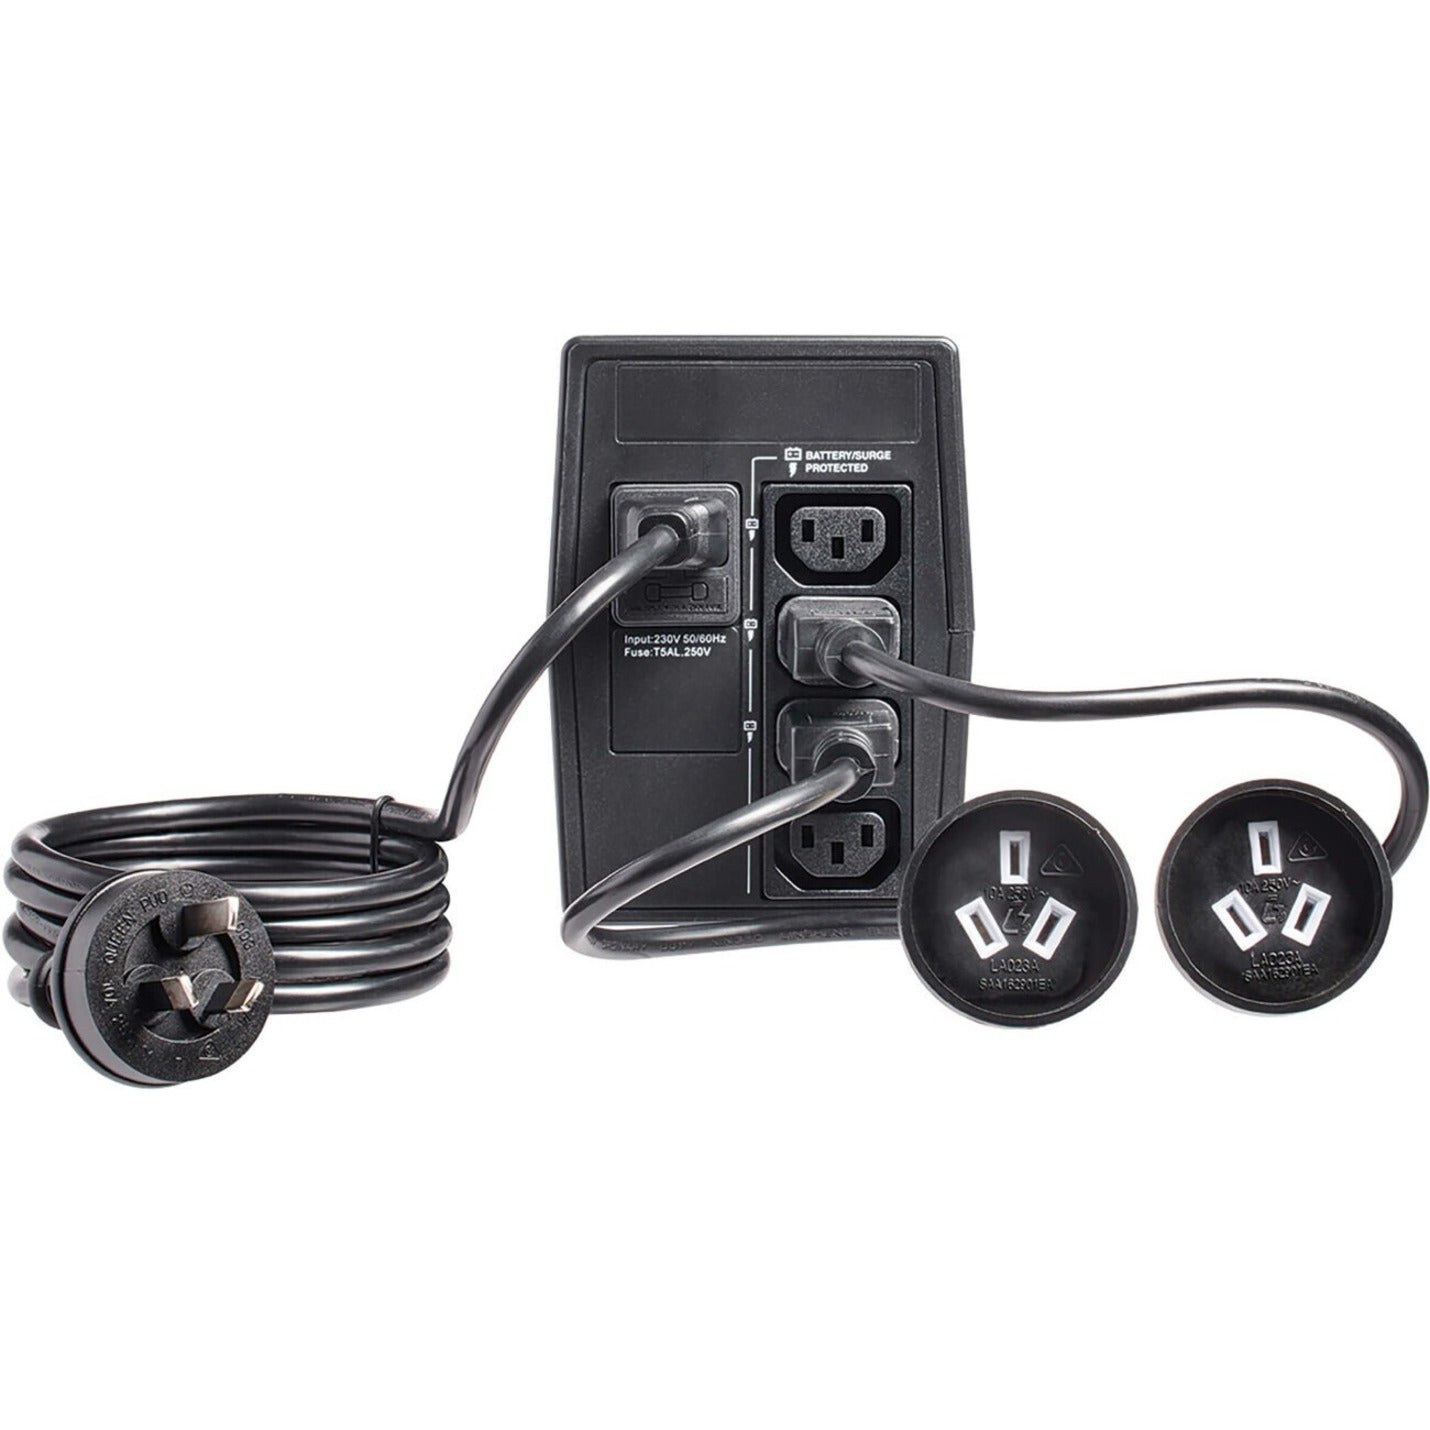 Tripp Lite 650VA 360W 230V Line-Interactive UPS - 4 C13 Outlets 2 Australian Outlet Adapters Tower